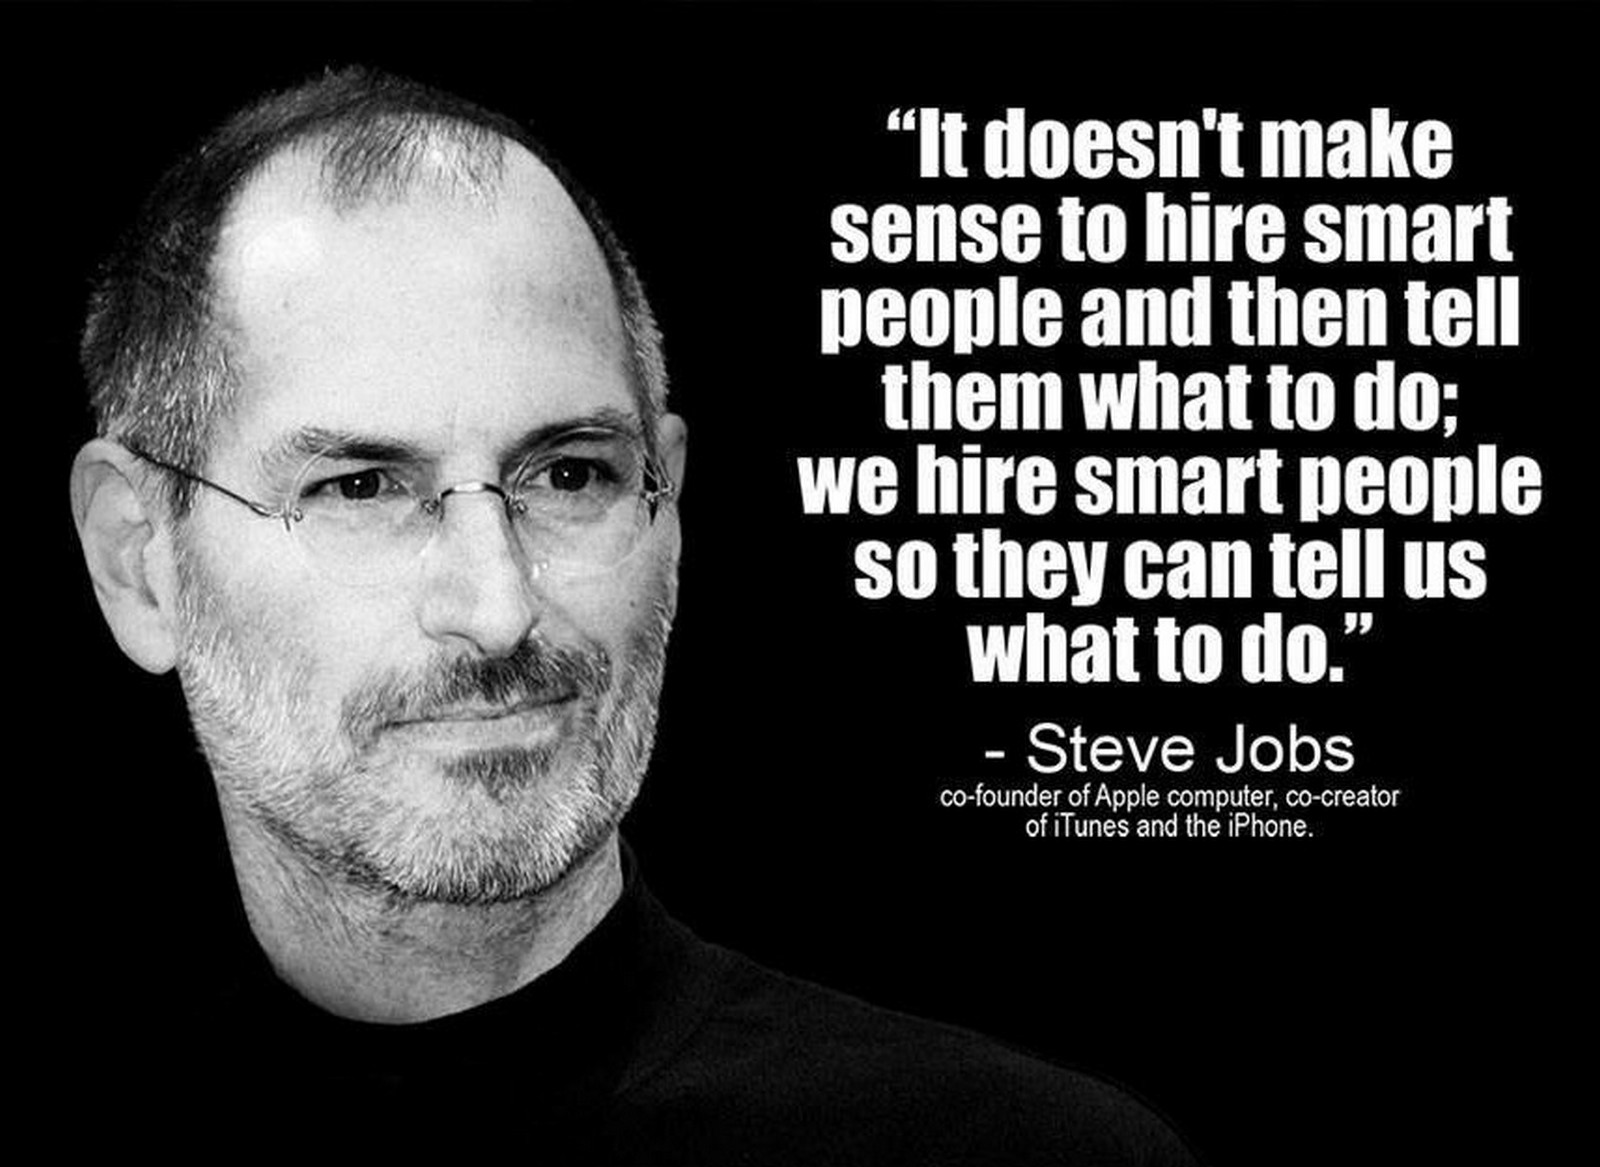 19 Best Steve Jobs Quotes - "It doesn't make sense to hire smart people and tell them what to do; We hire smart people so they can tell us what to do."